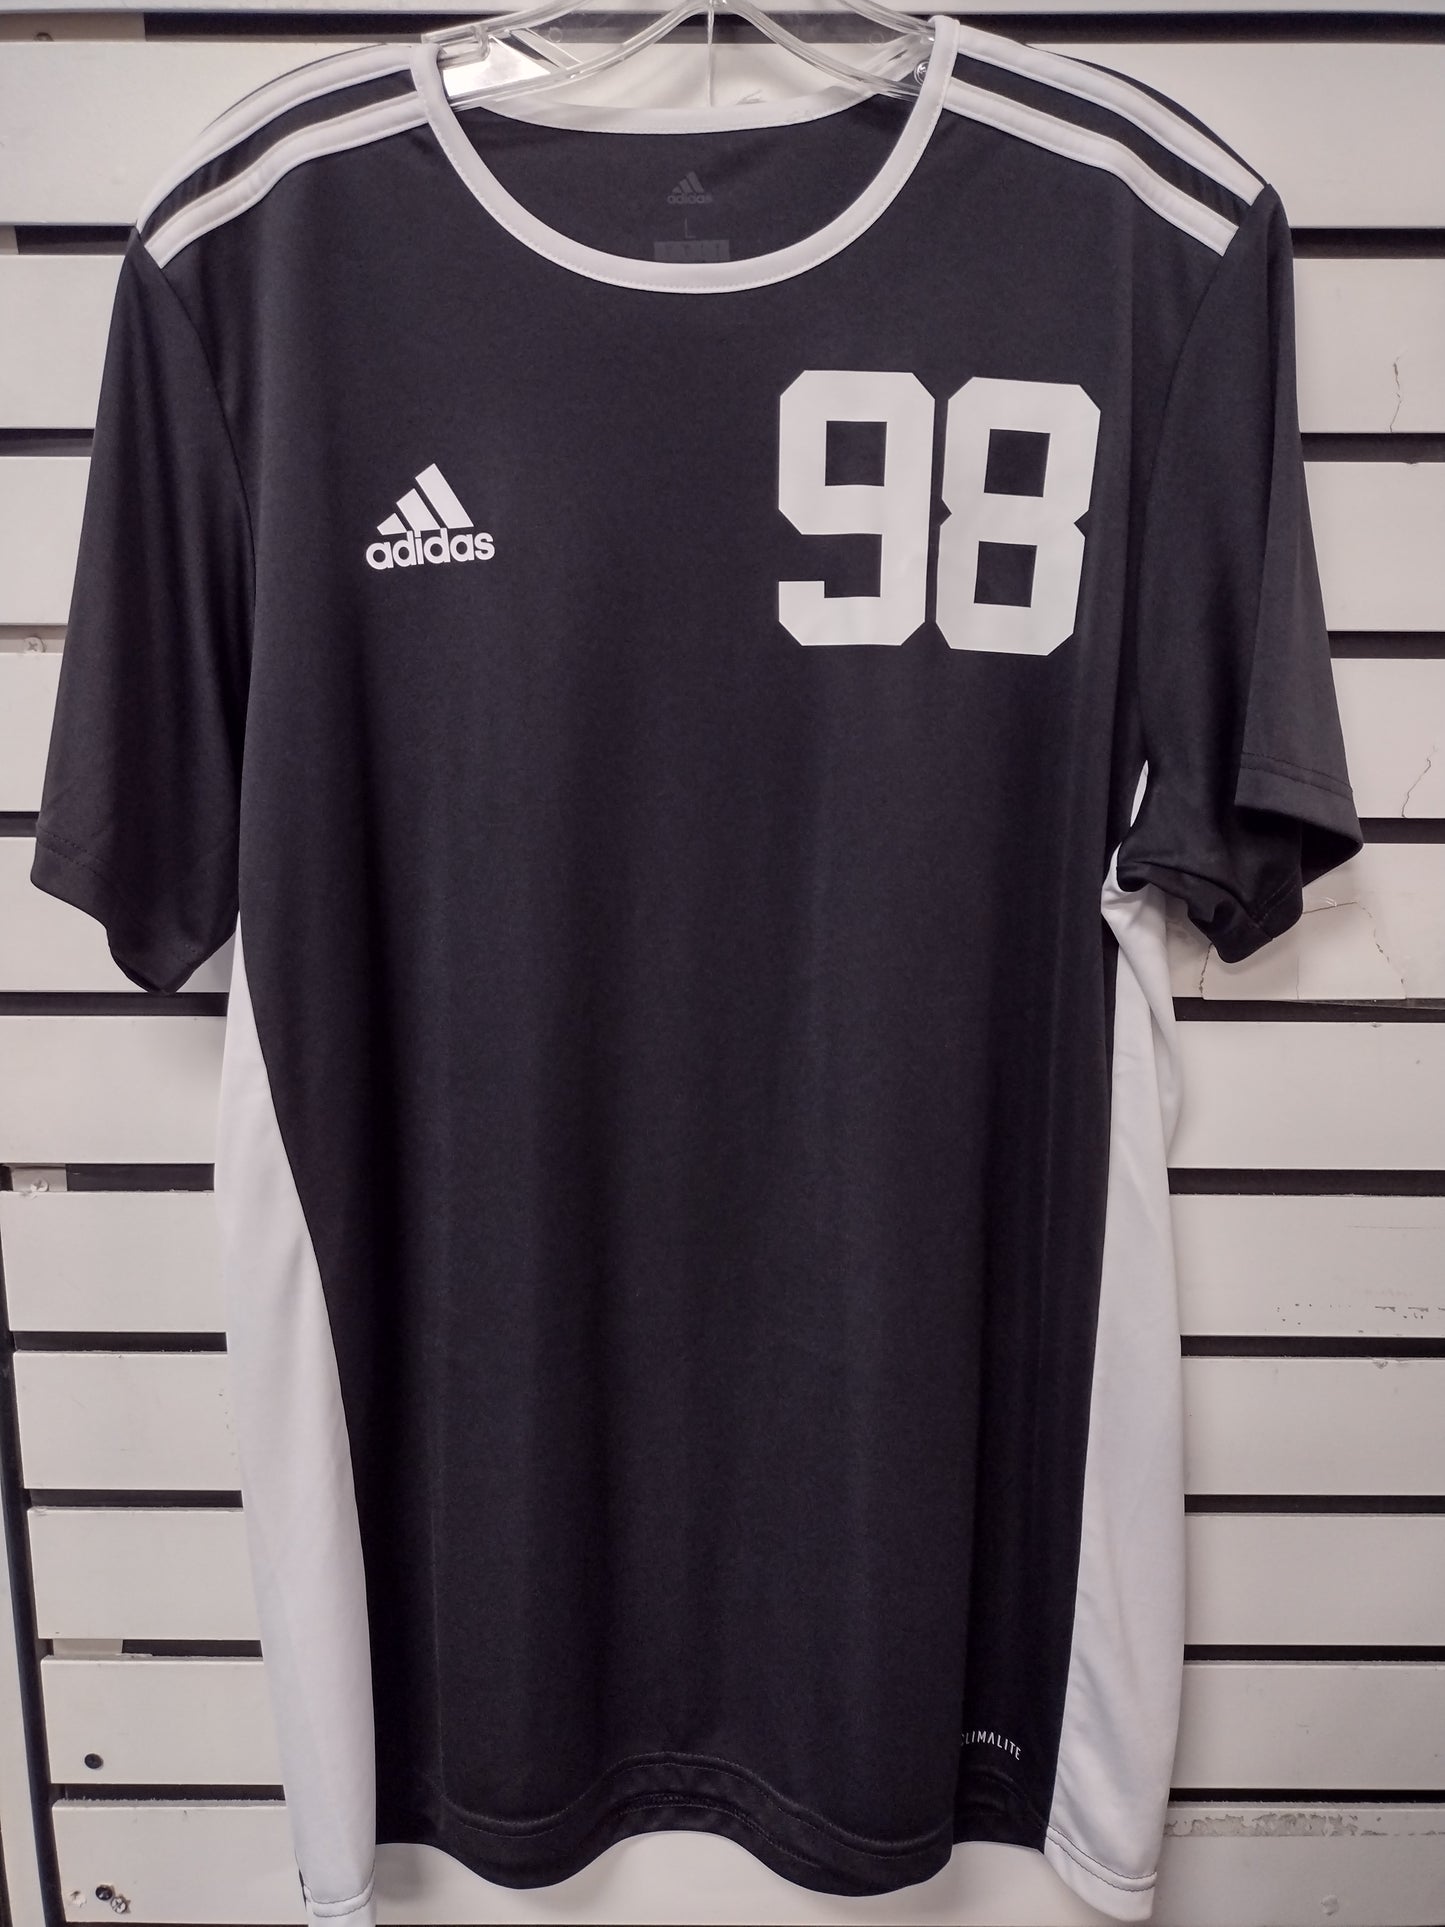 adidas Avail Over The James 98 Jersey Men's Large "Over THE JAMES 98" on back